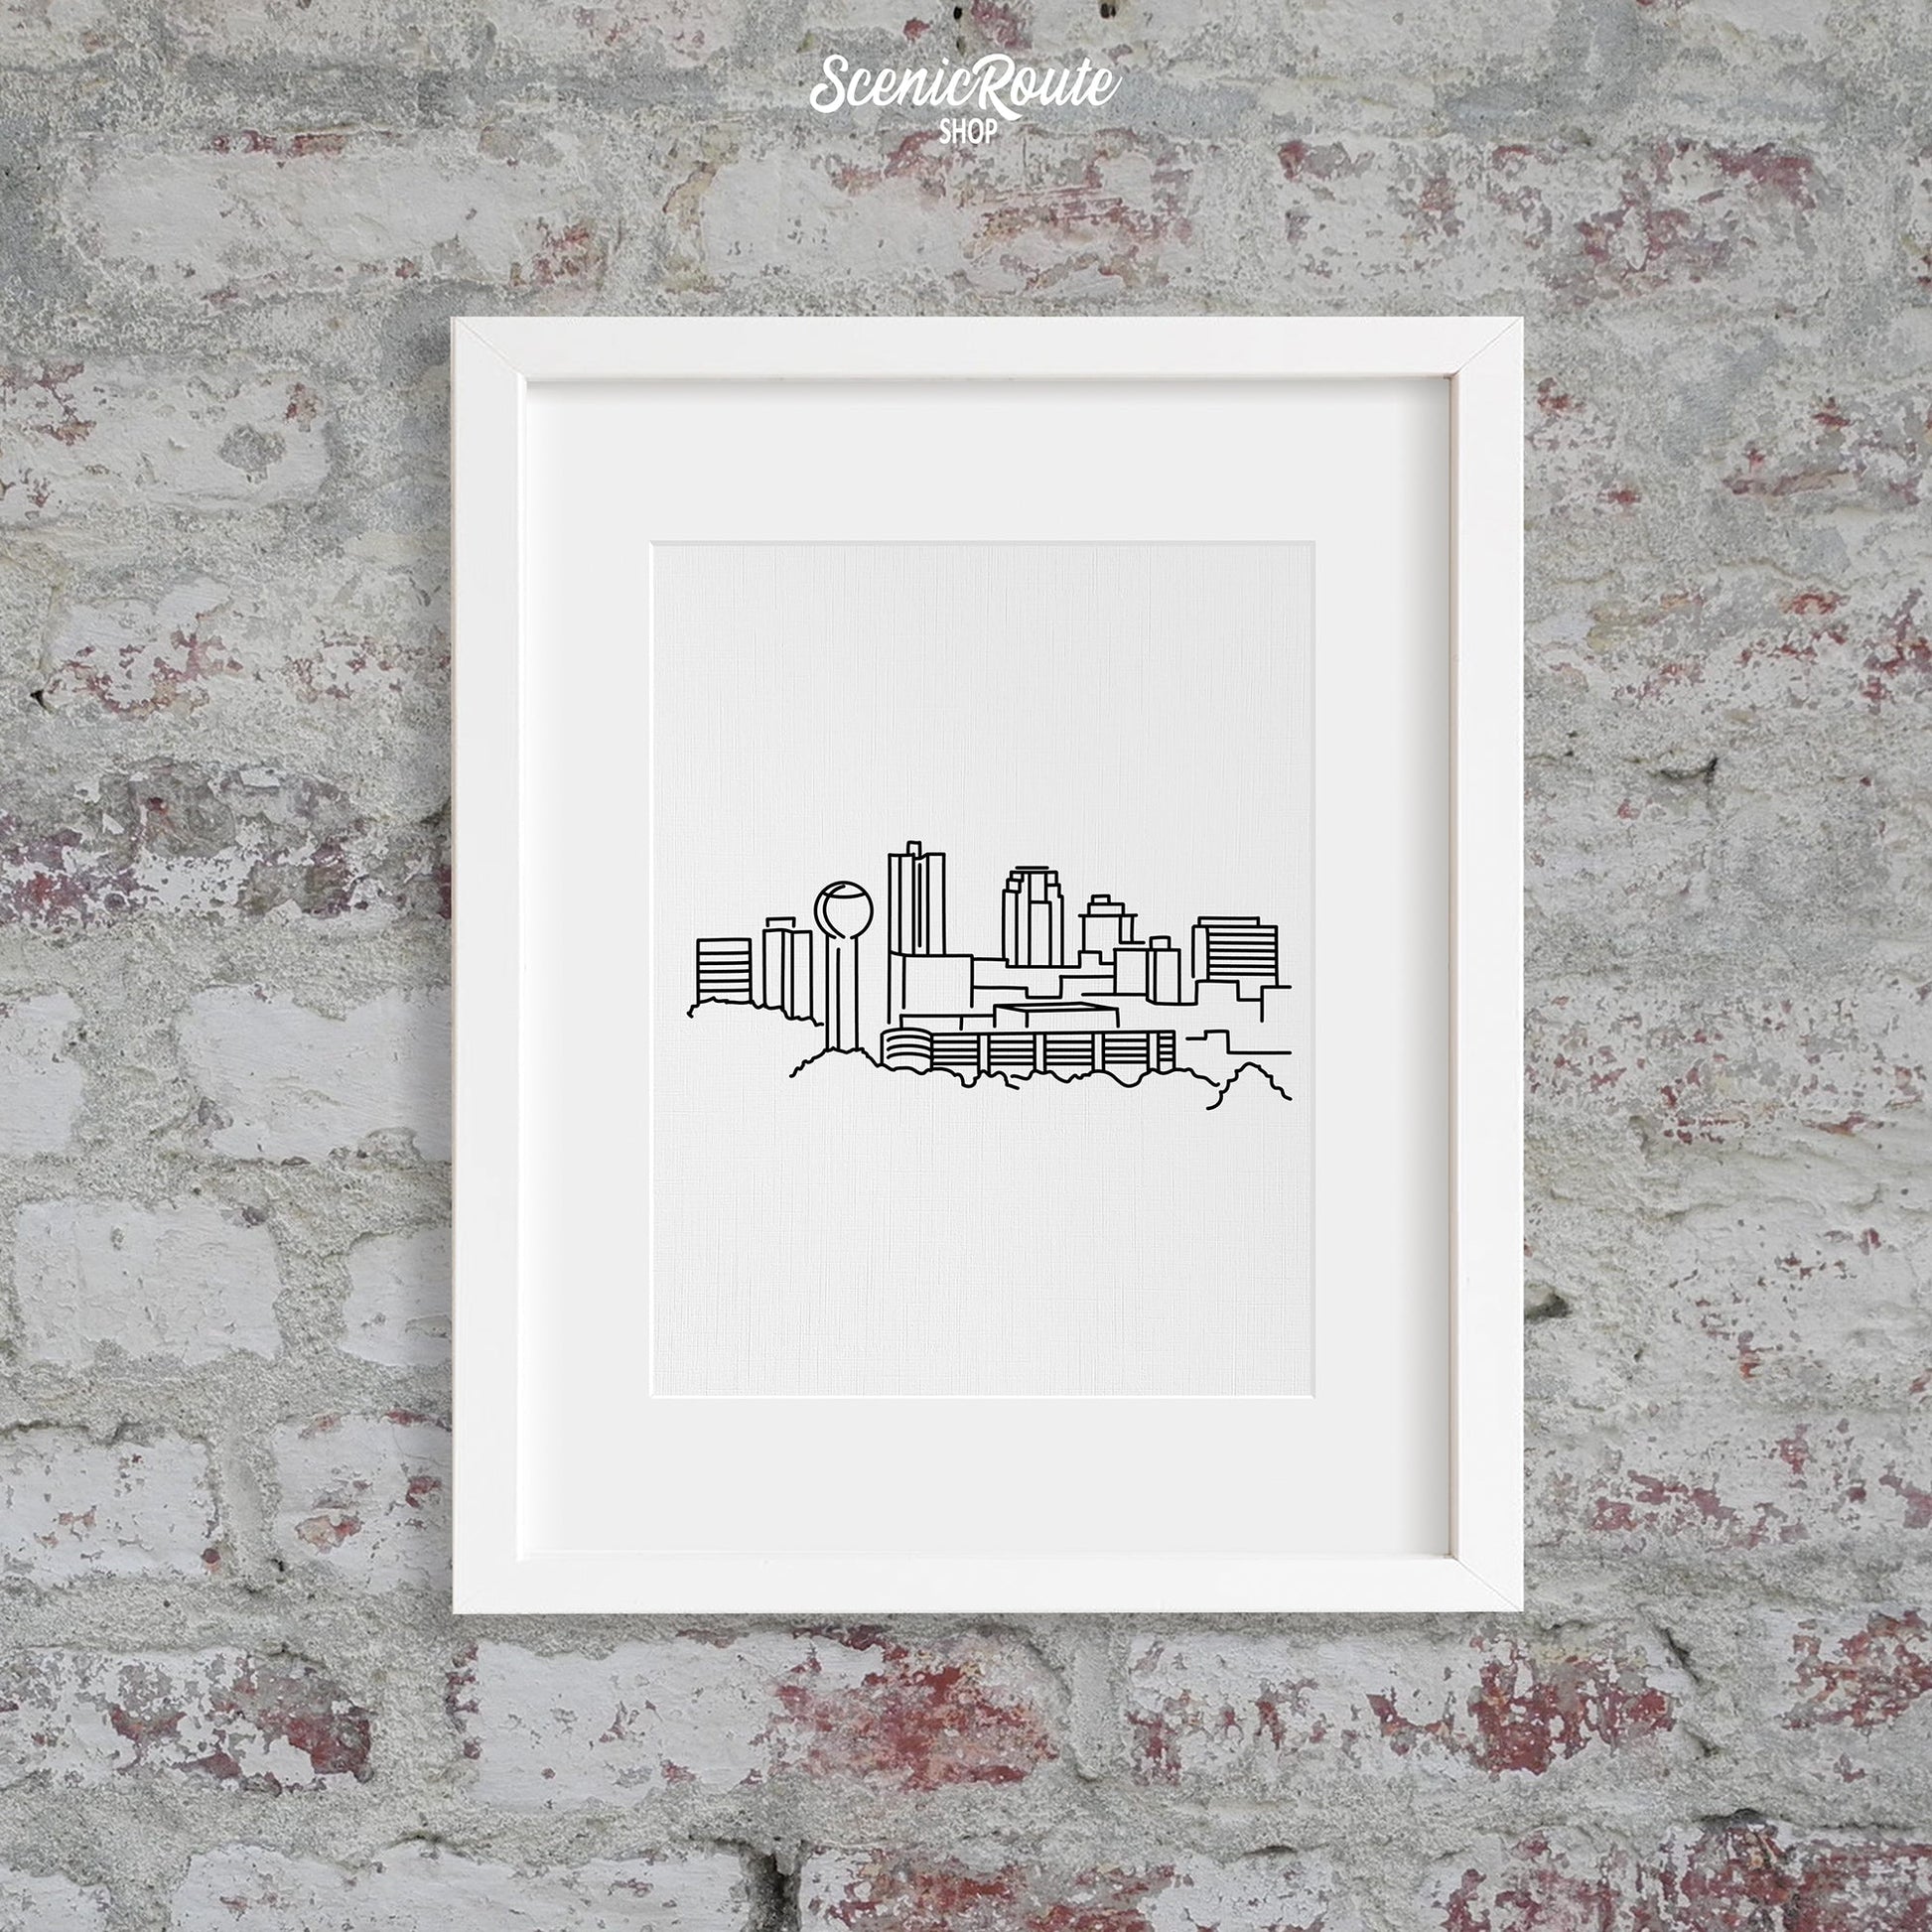 A framed line art drawing of the Knoxville Skyline on a brick wall